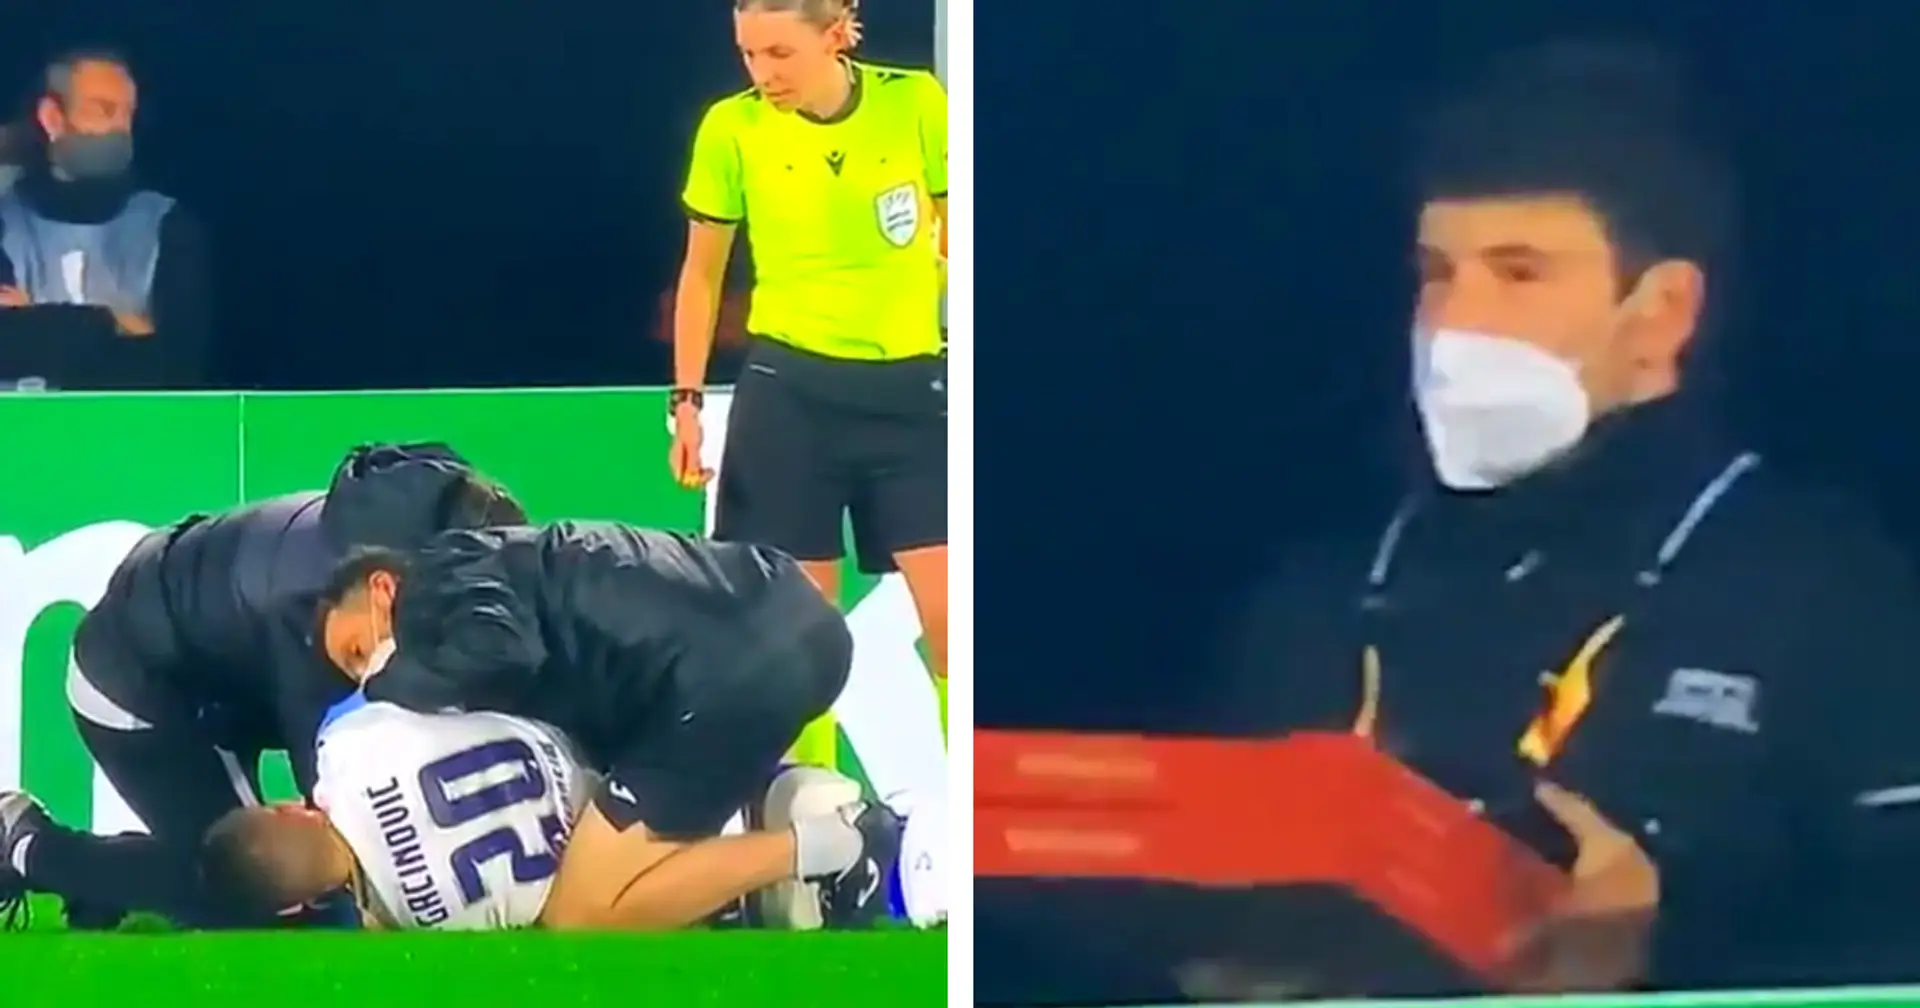 Shocked steward brings pizza as player gets treatment for rough clash